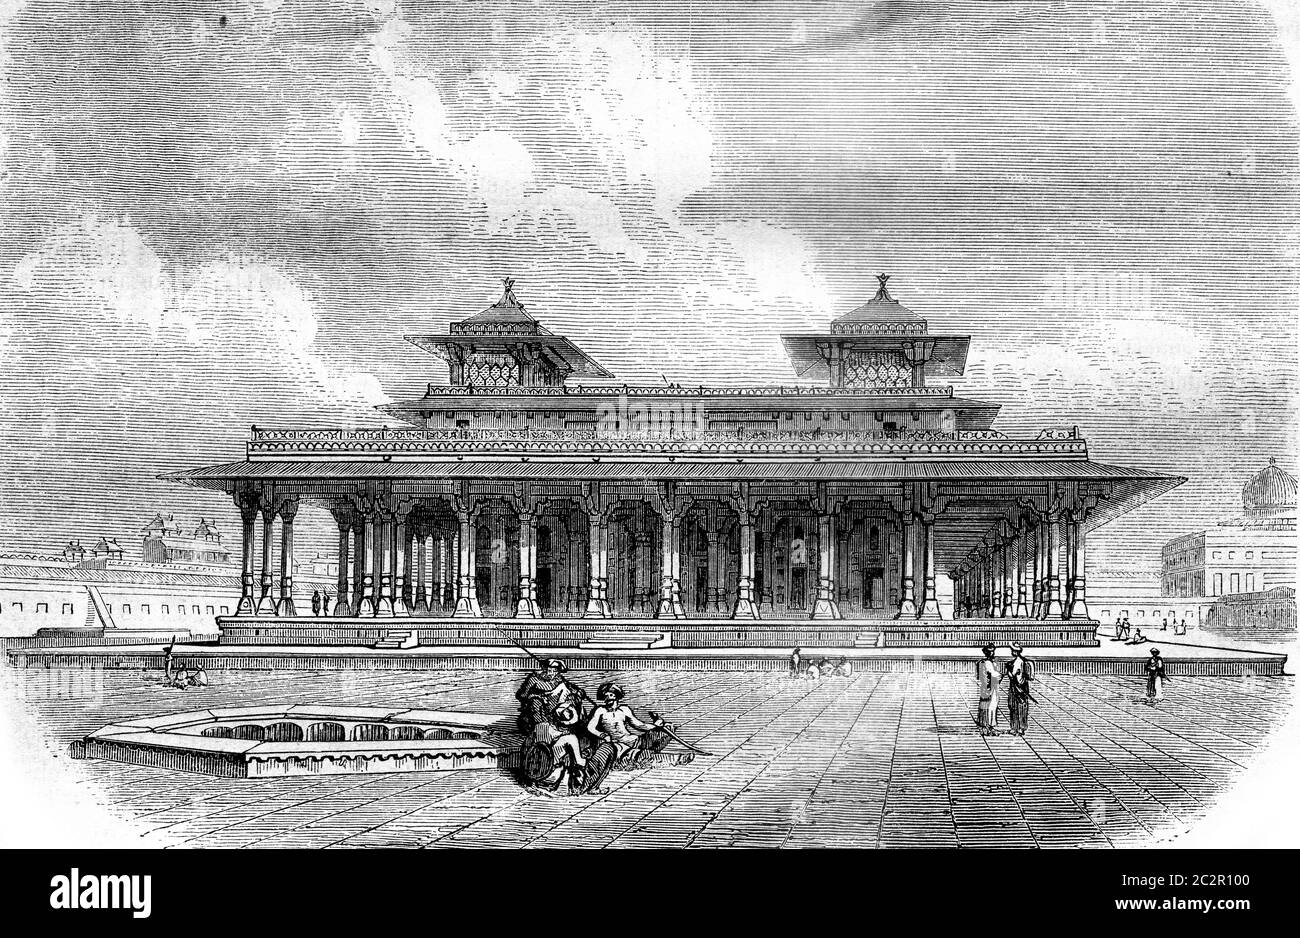 A part of the Palace, in the fort of Allahabad, vintage engraved illustration. Magasin Pittoresque 1858. Stock Photo